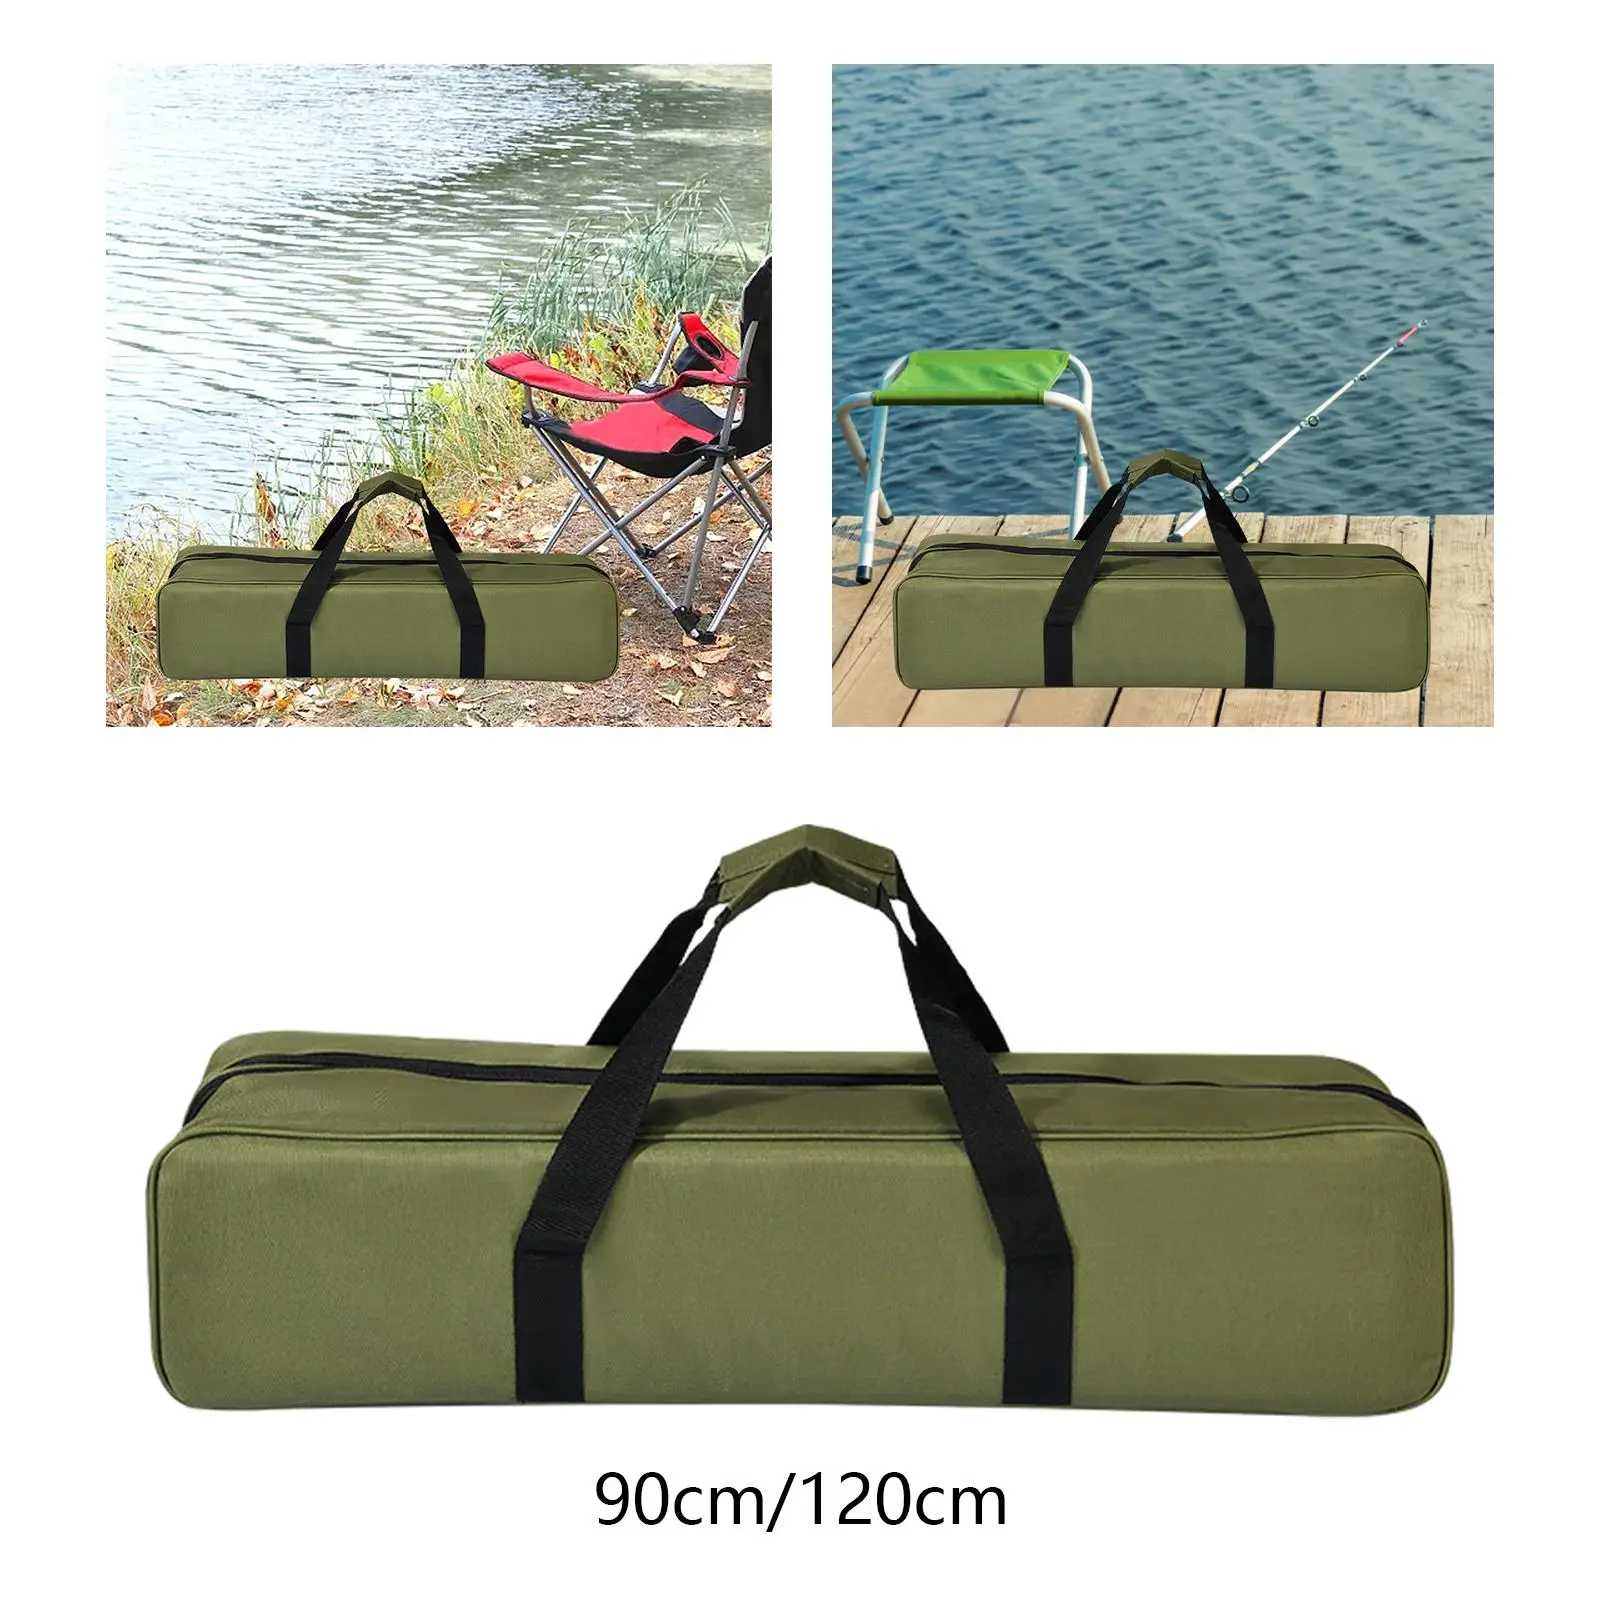 Camping Storage Bag Carry Handles Storage Container Zipper Carrying Bag for Travel Canopy Pole Fishing Camping Trekking Pole